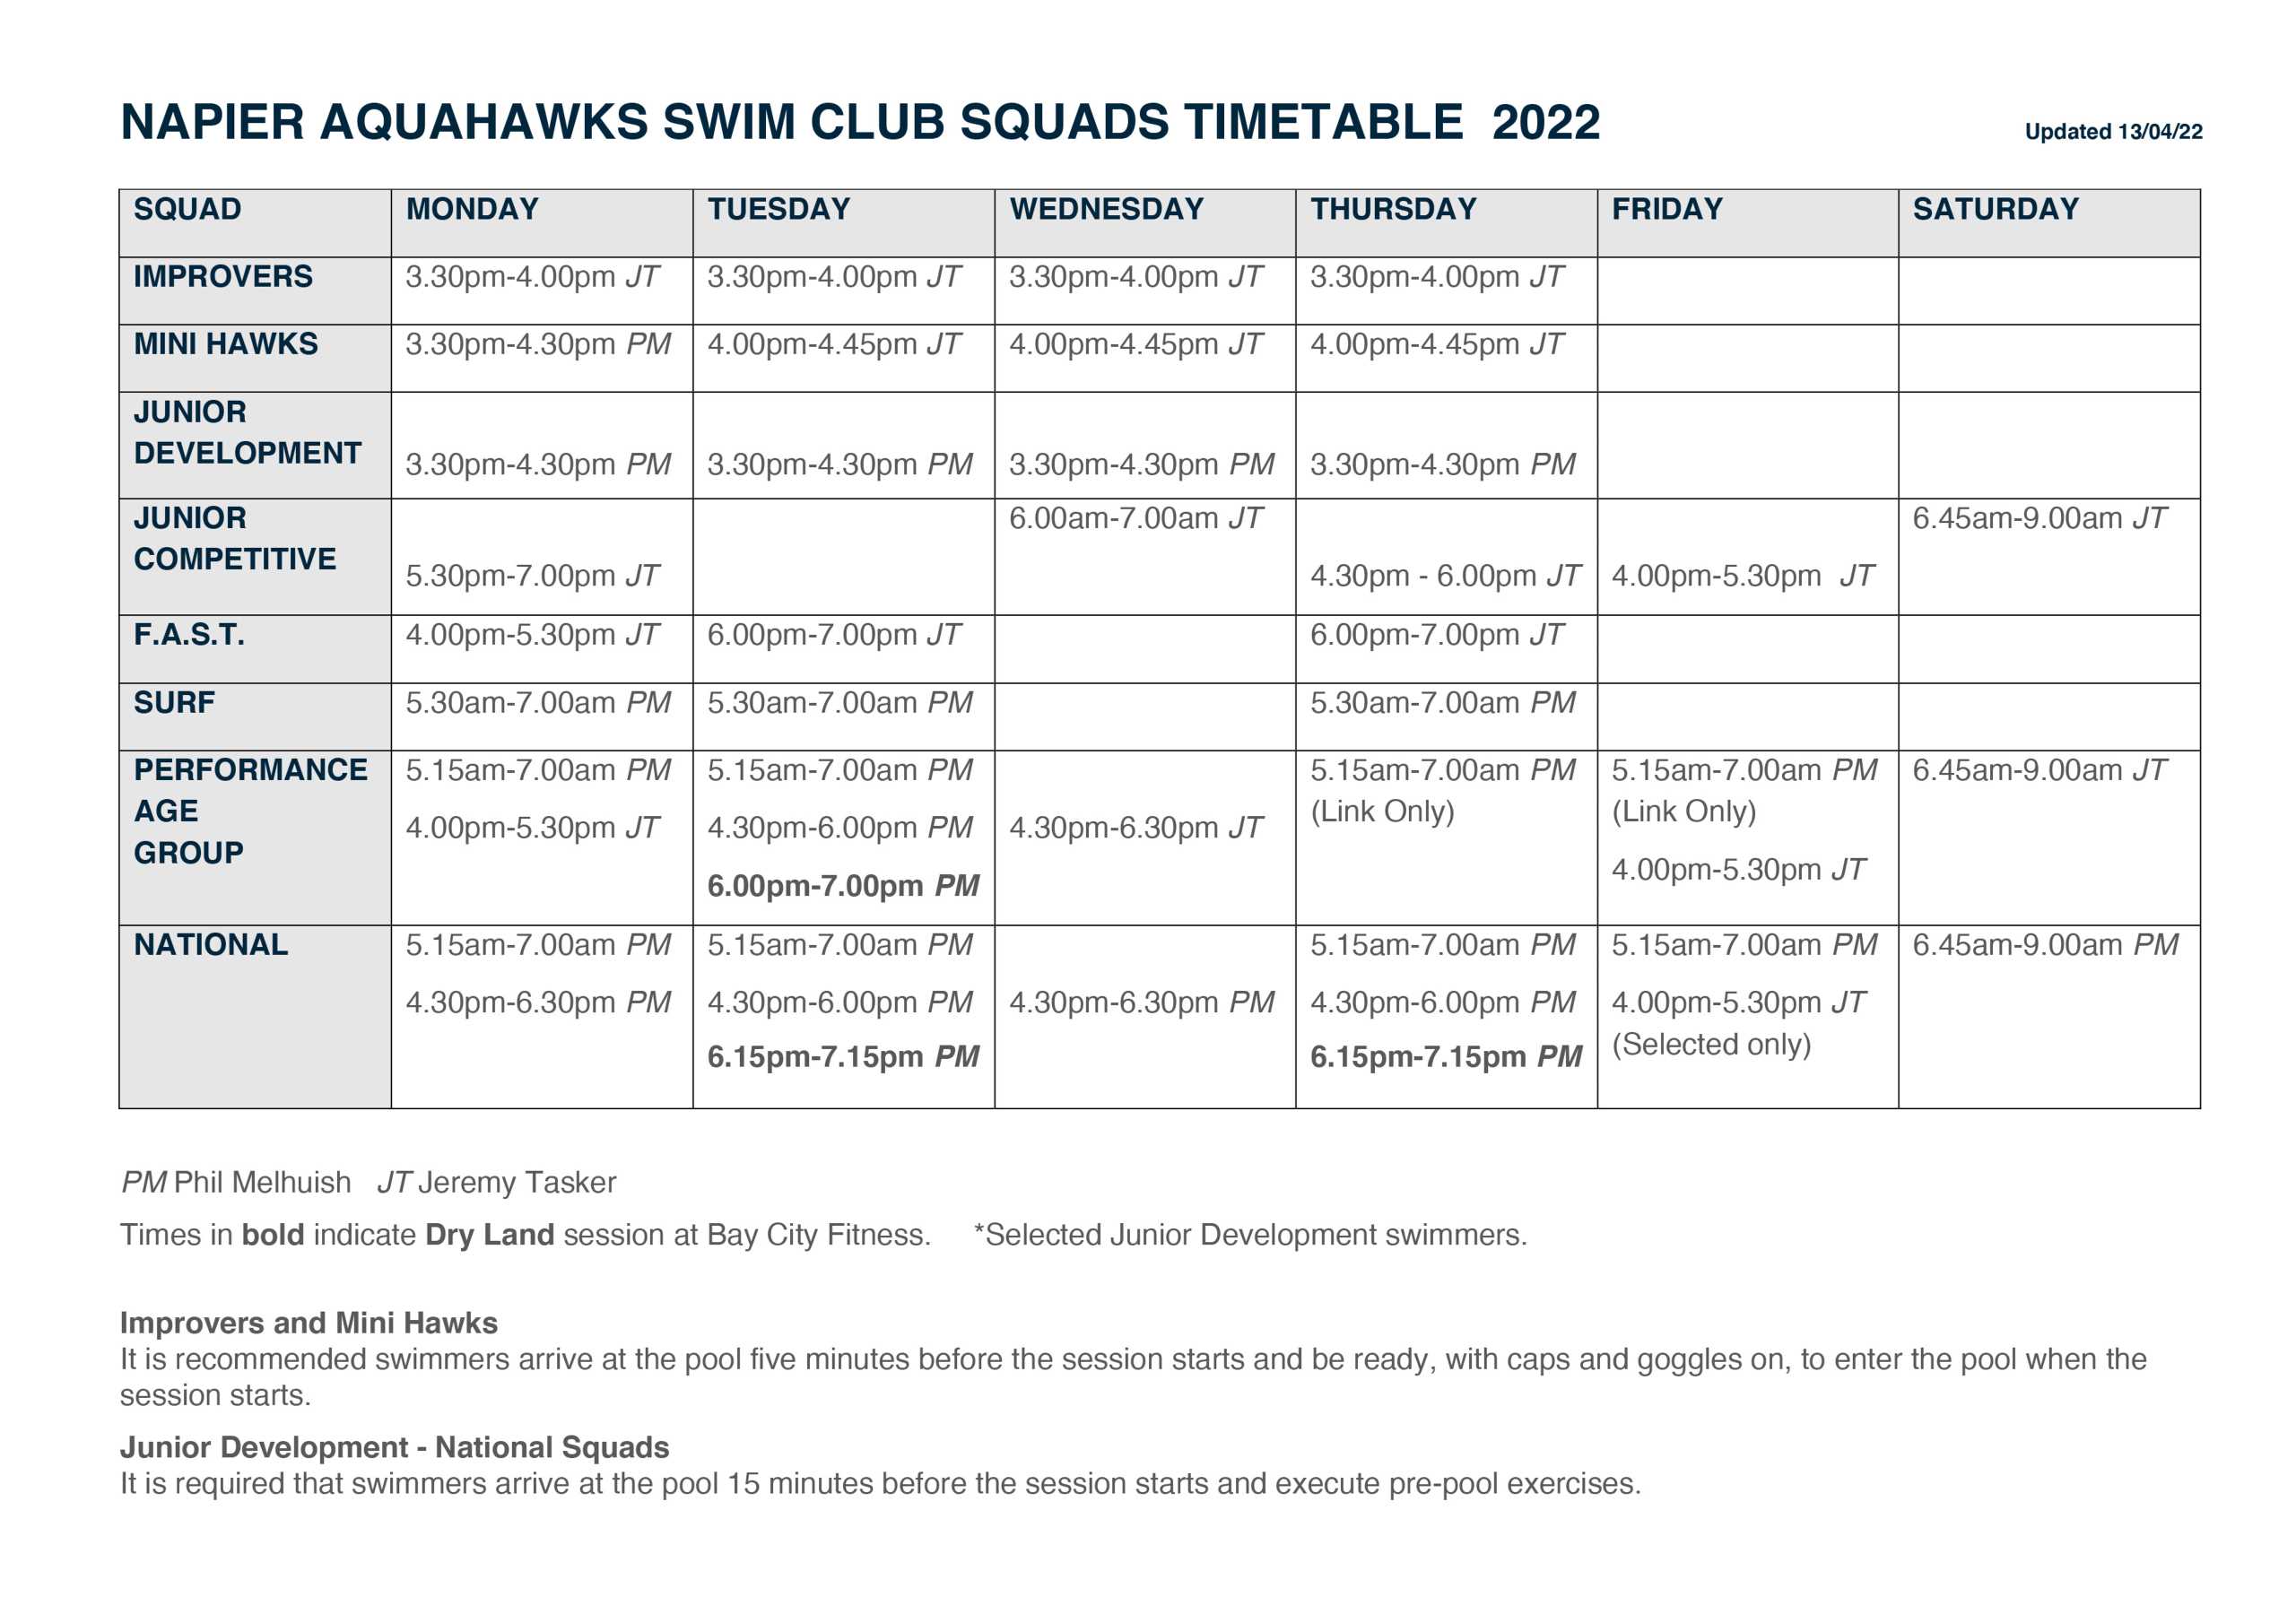 SQUAD TIME TABLE-2022-2